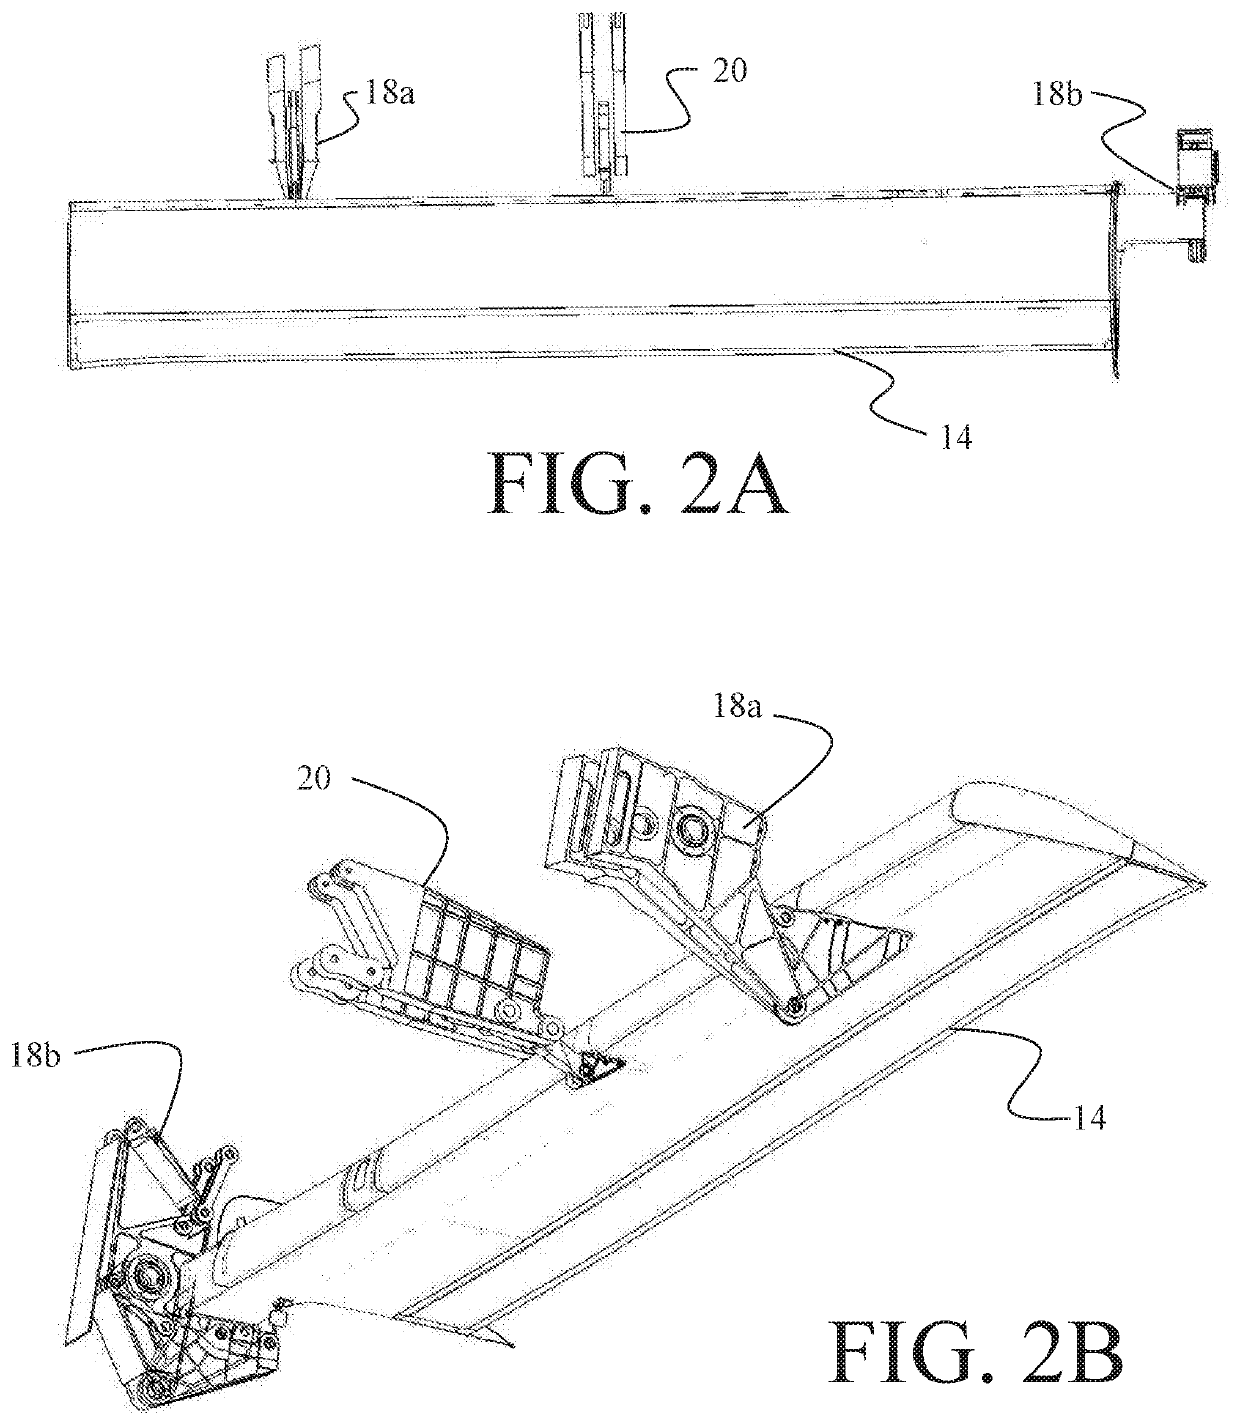 Self-aligning low load shear out joint